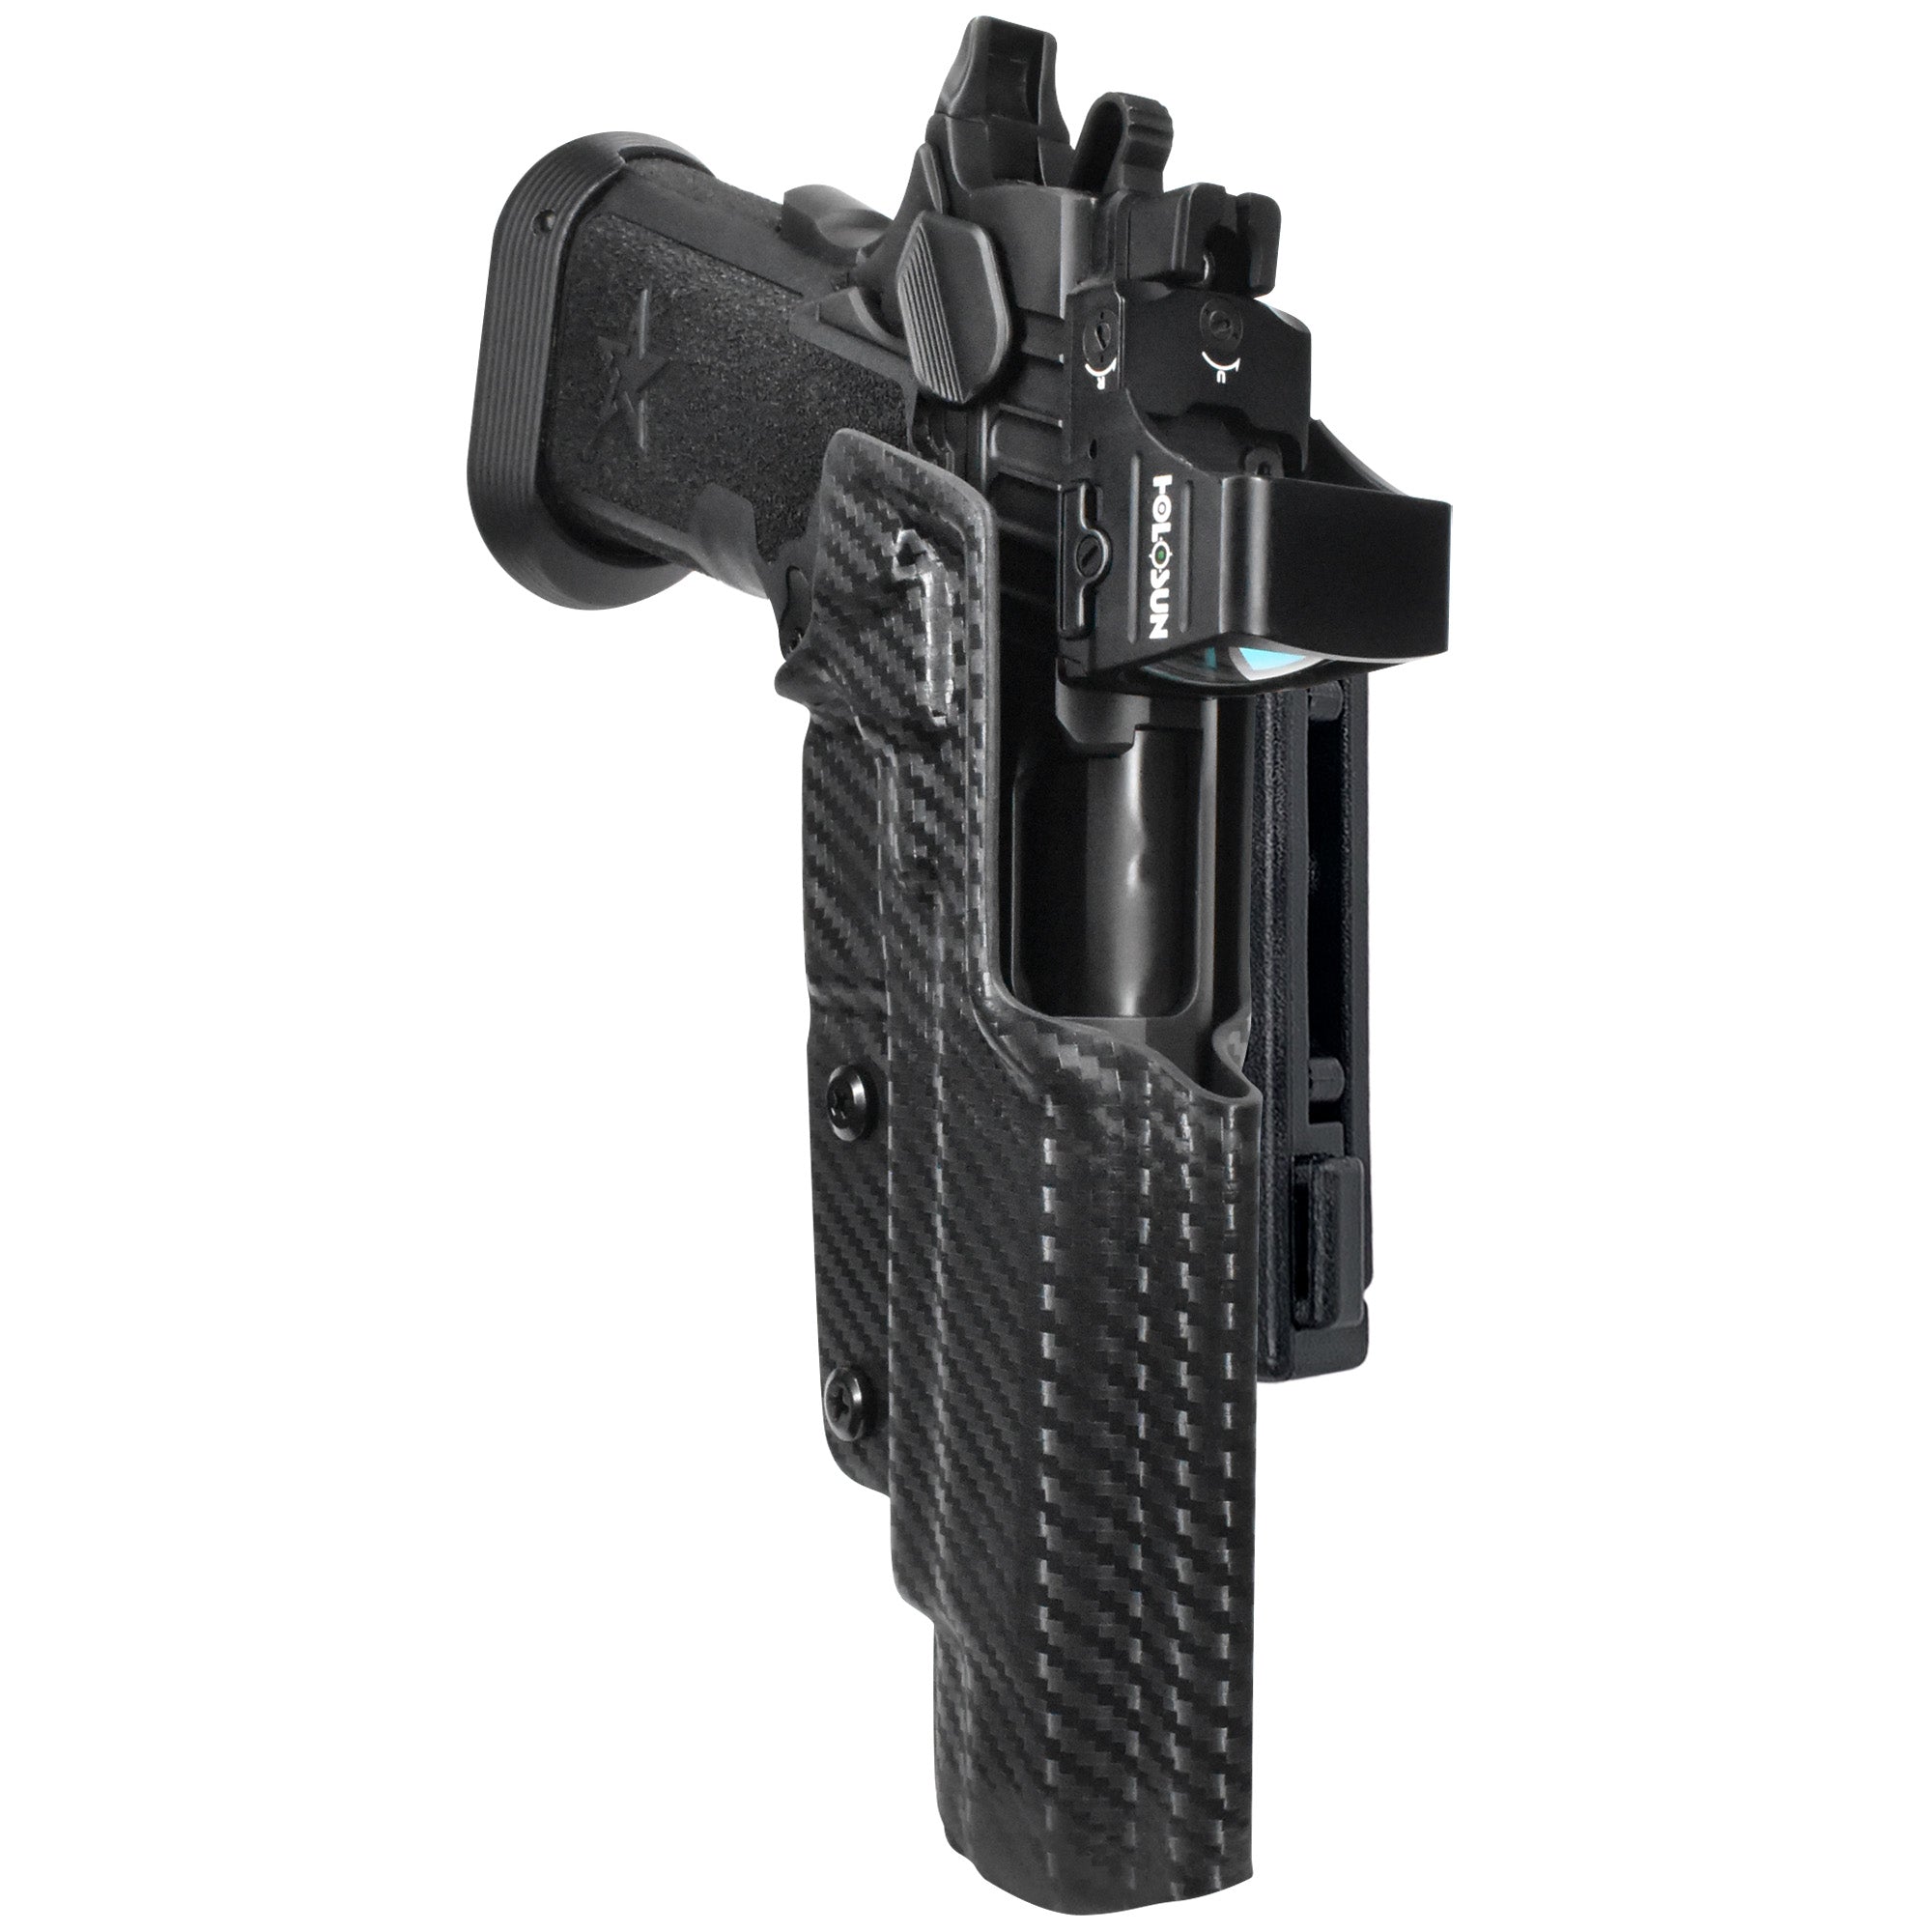 Staccato XL Pro IDPA Competition Holster in Carbon Fiber